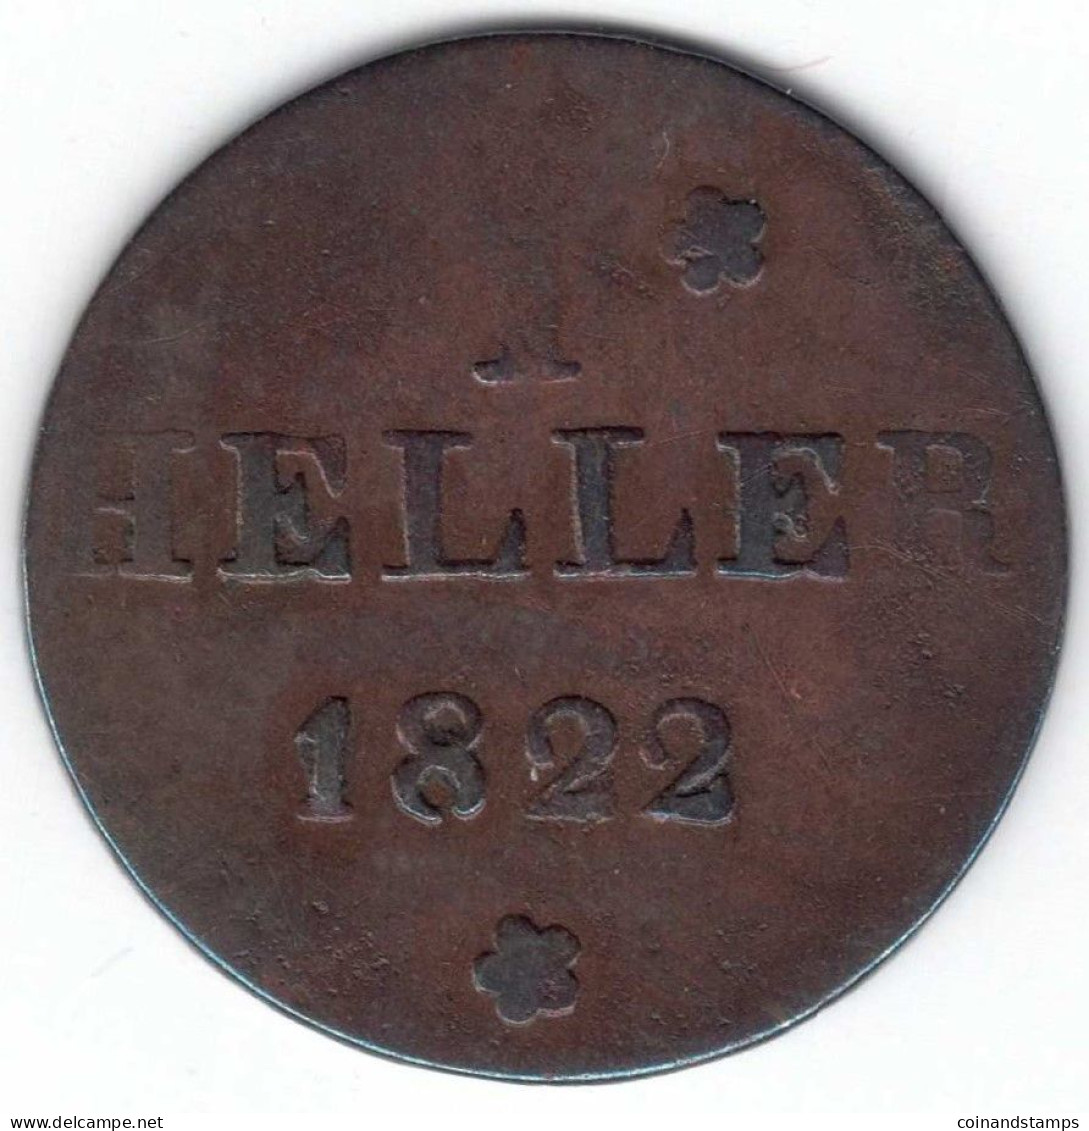 Frankfurt-Stadt I Heller 1822 G(F)B Cu. Jaeger 10, AKS 30, Ss - Small Coins & Other Subdivisions